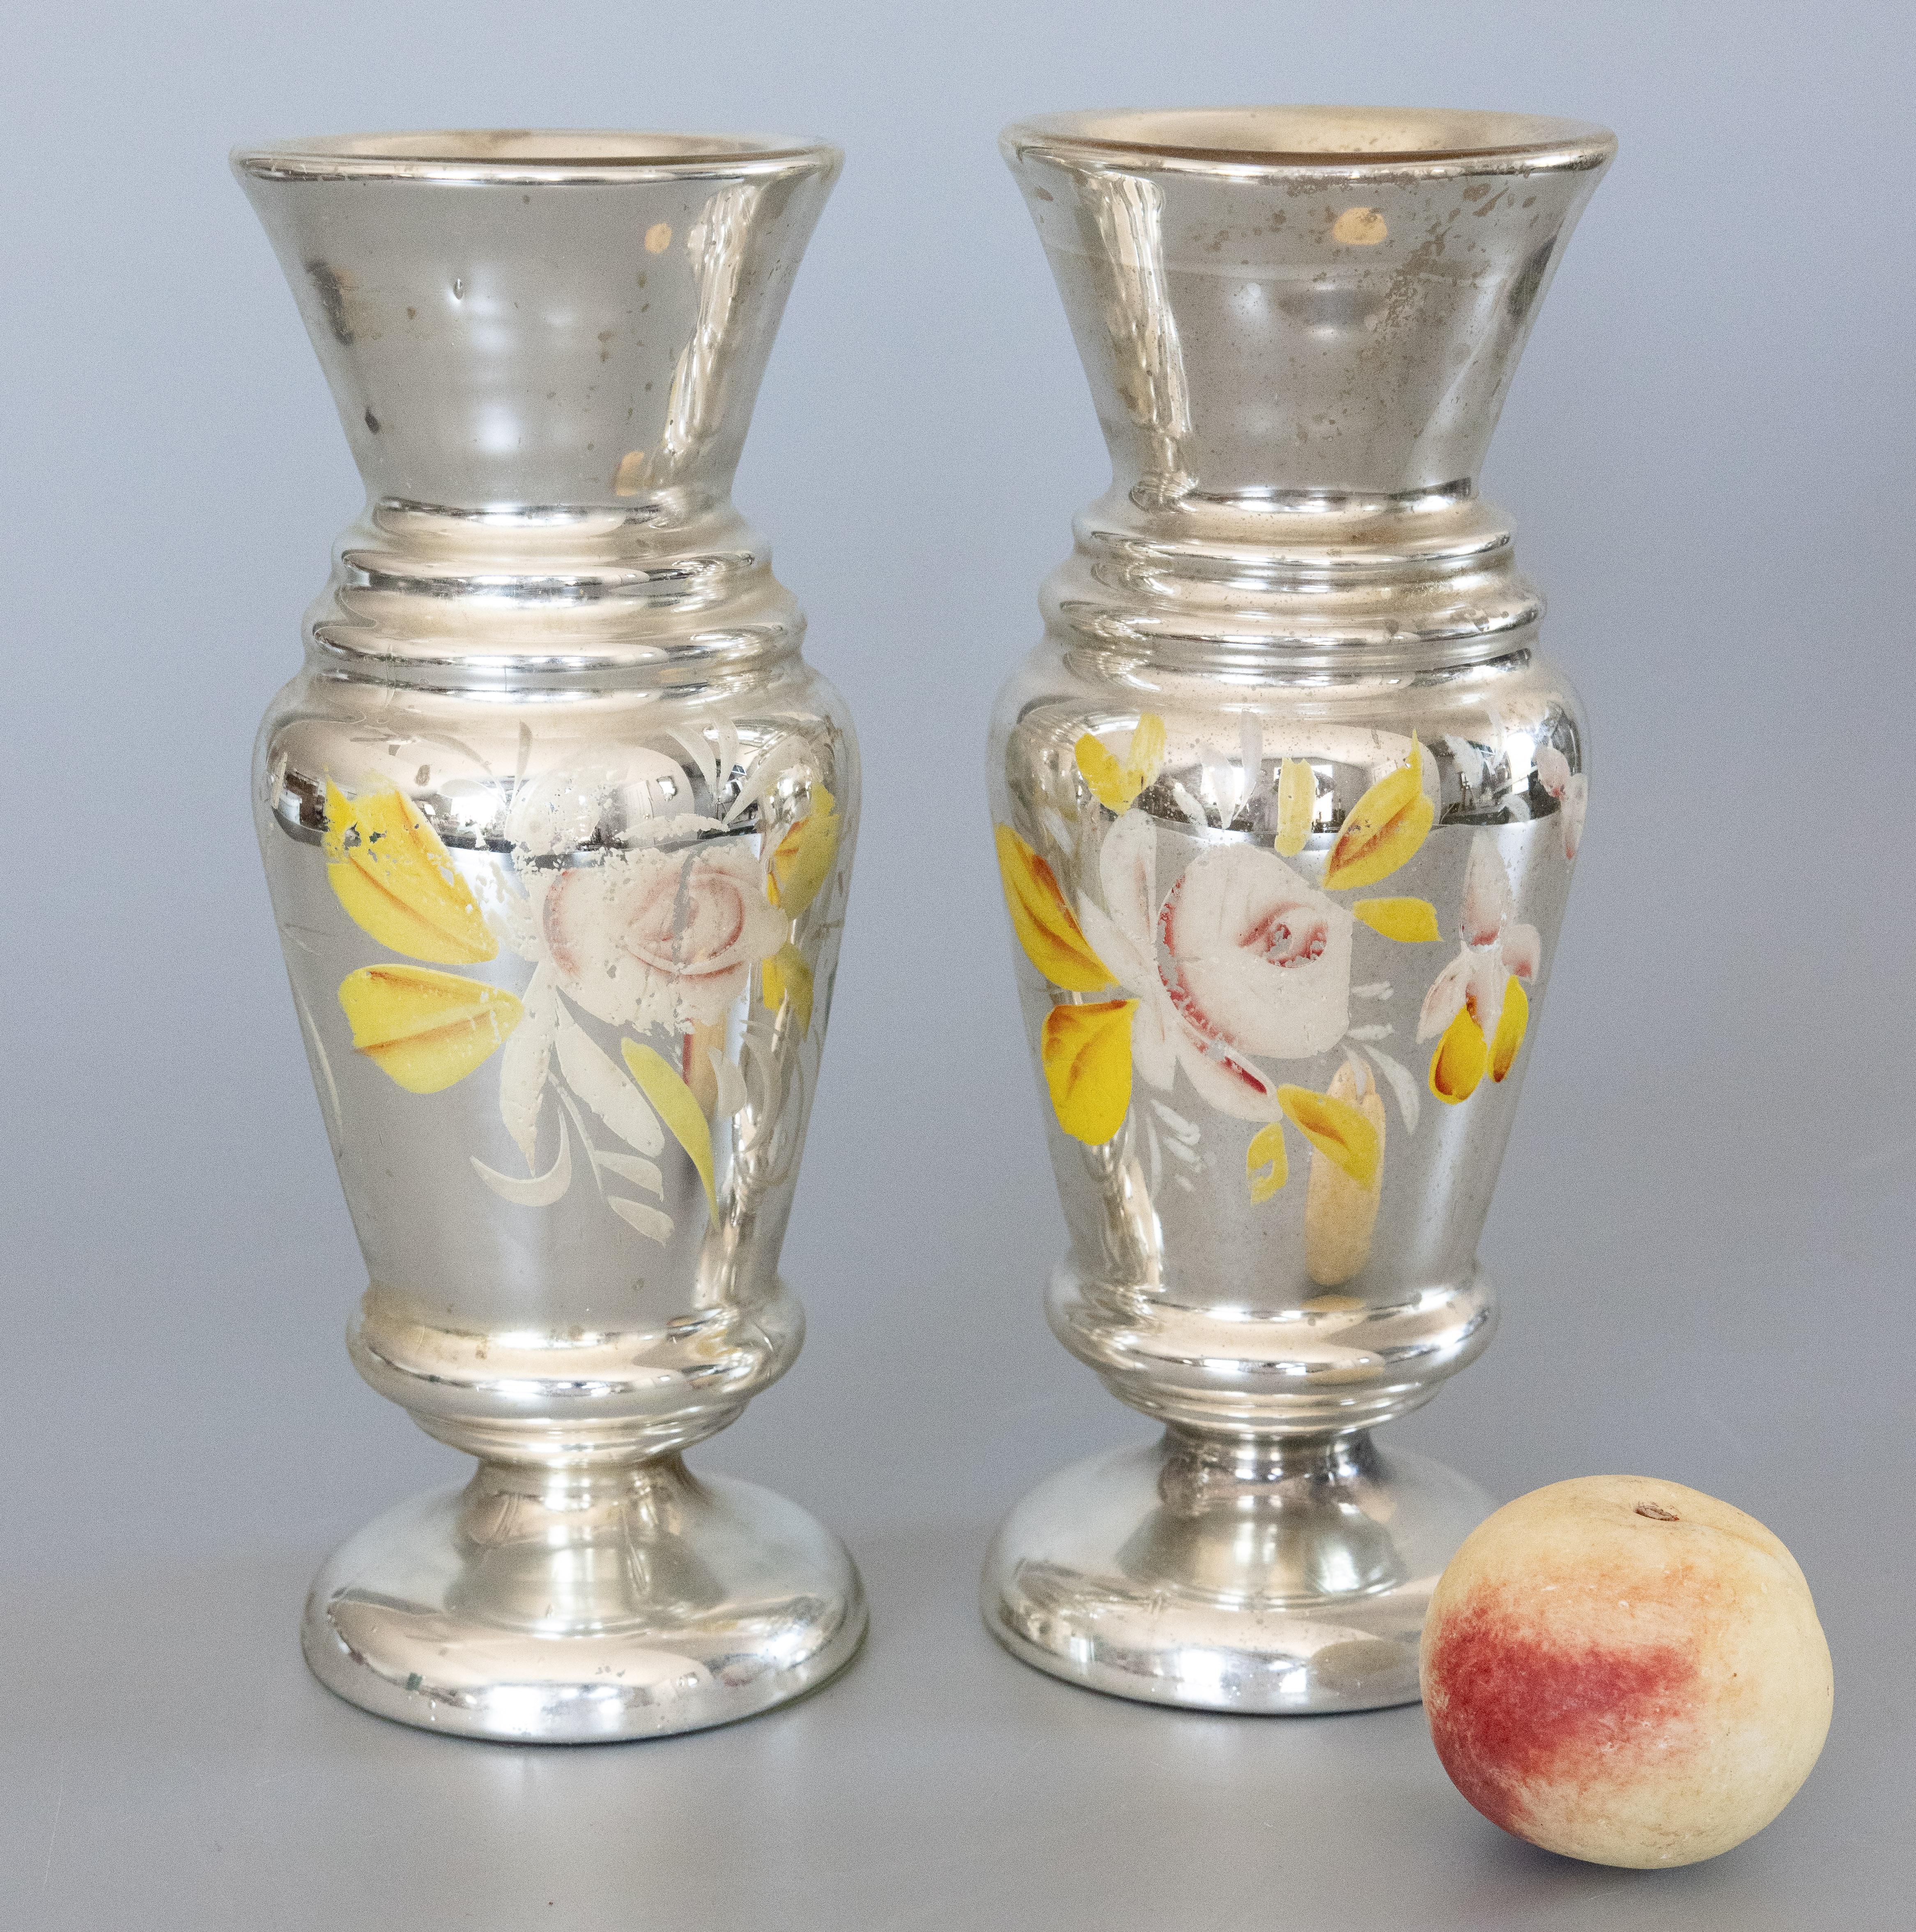 Pair of Large 19th Century English Silvered Mercury Glass Vases For Sale 3